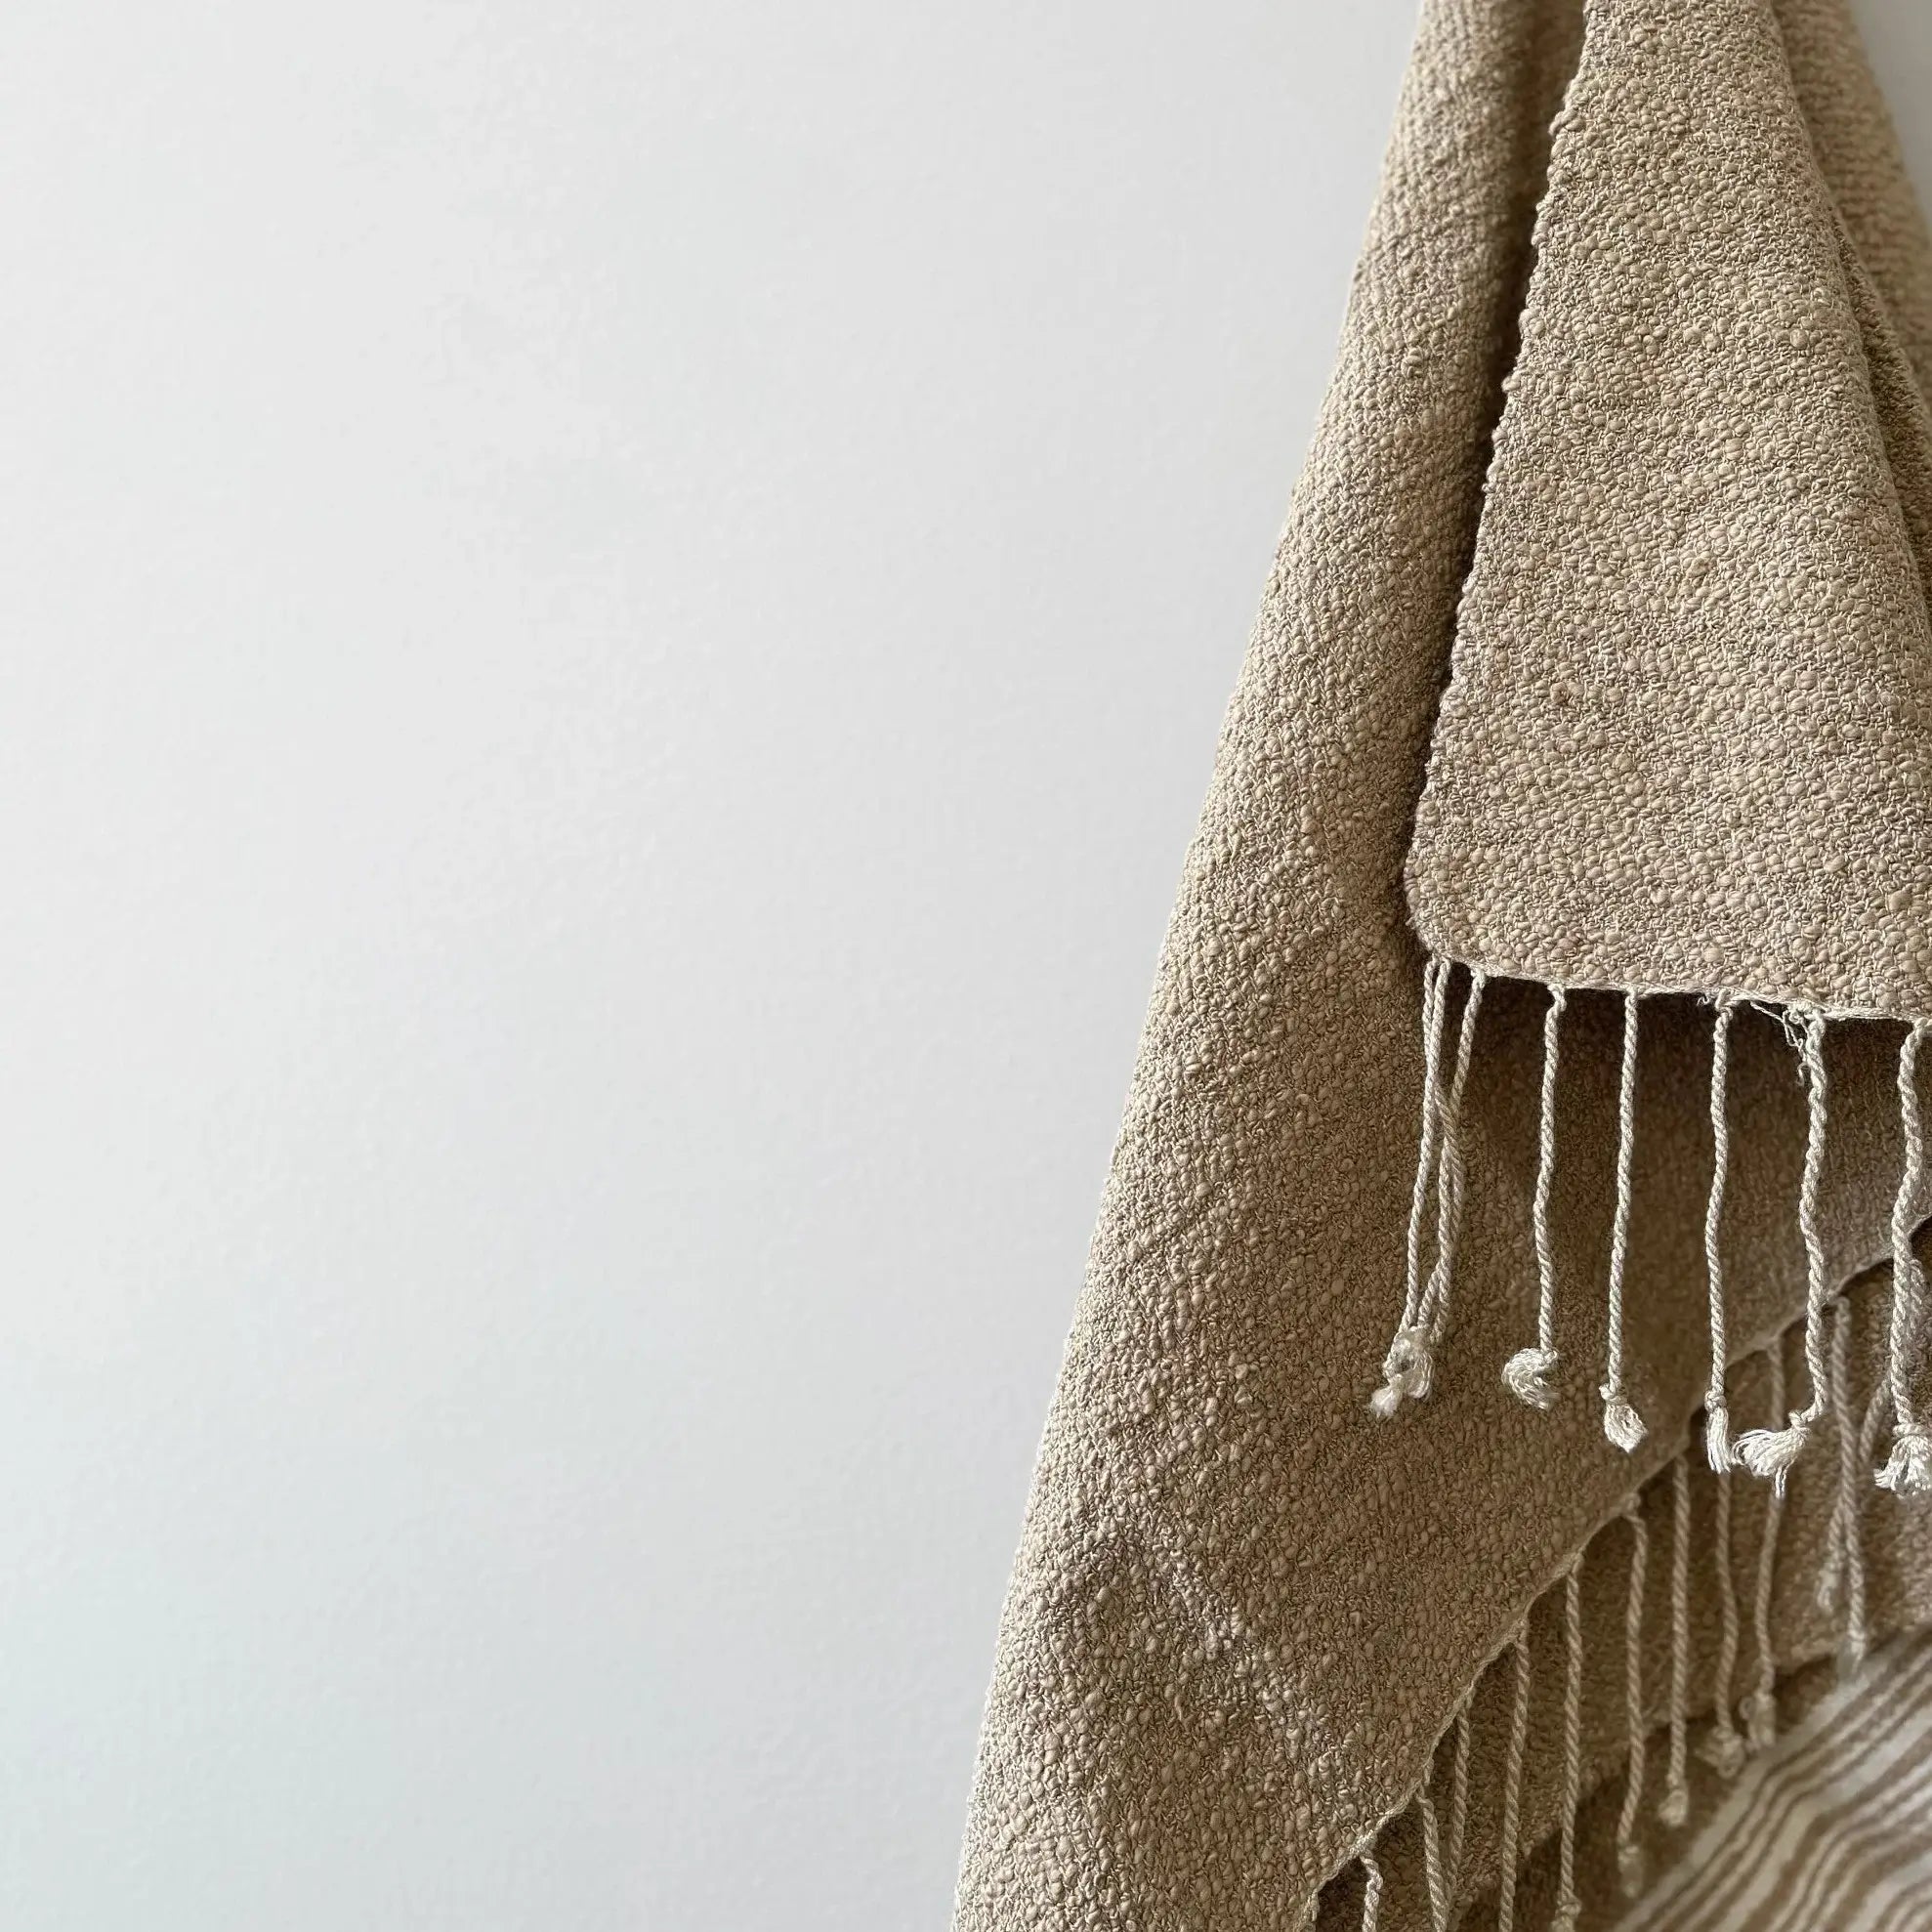 Dounia home Hand towel in Taup made of Organic cotton, Model: Aslal, Close Up View 